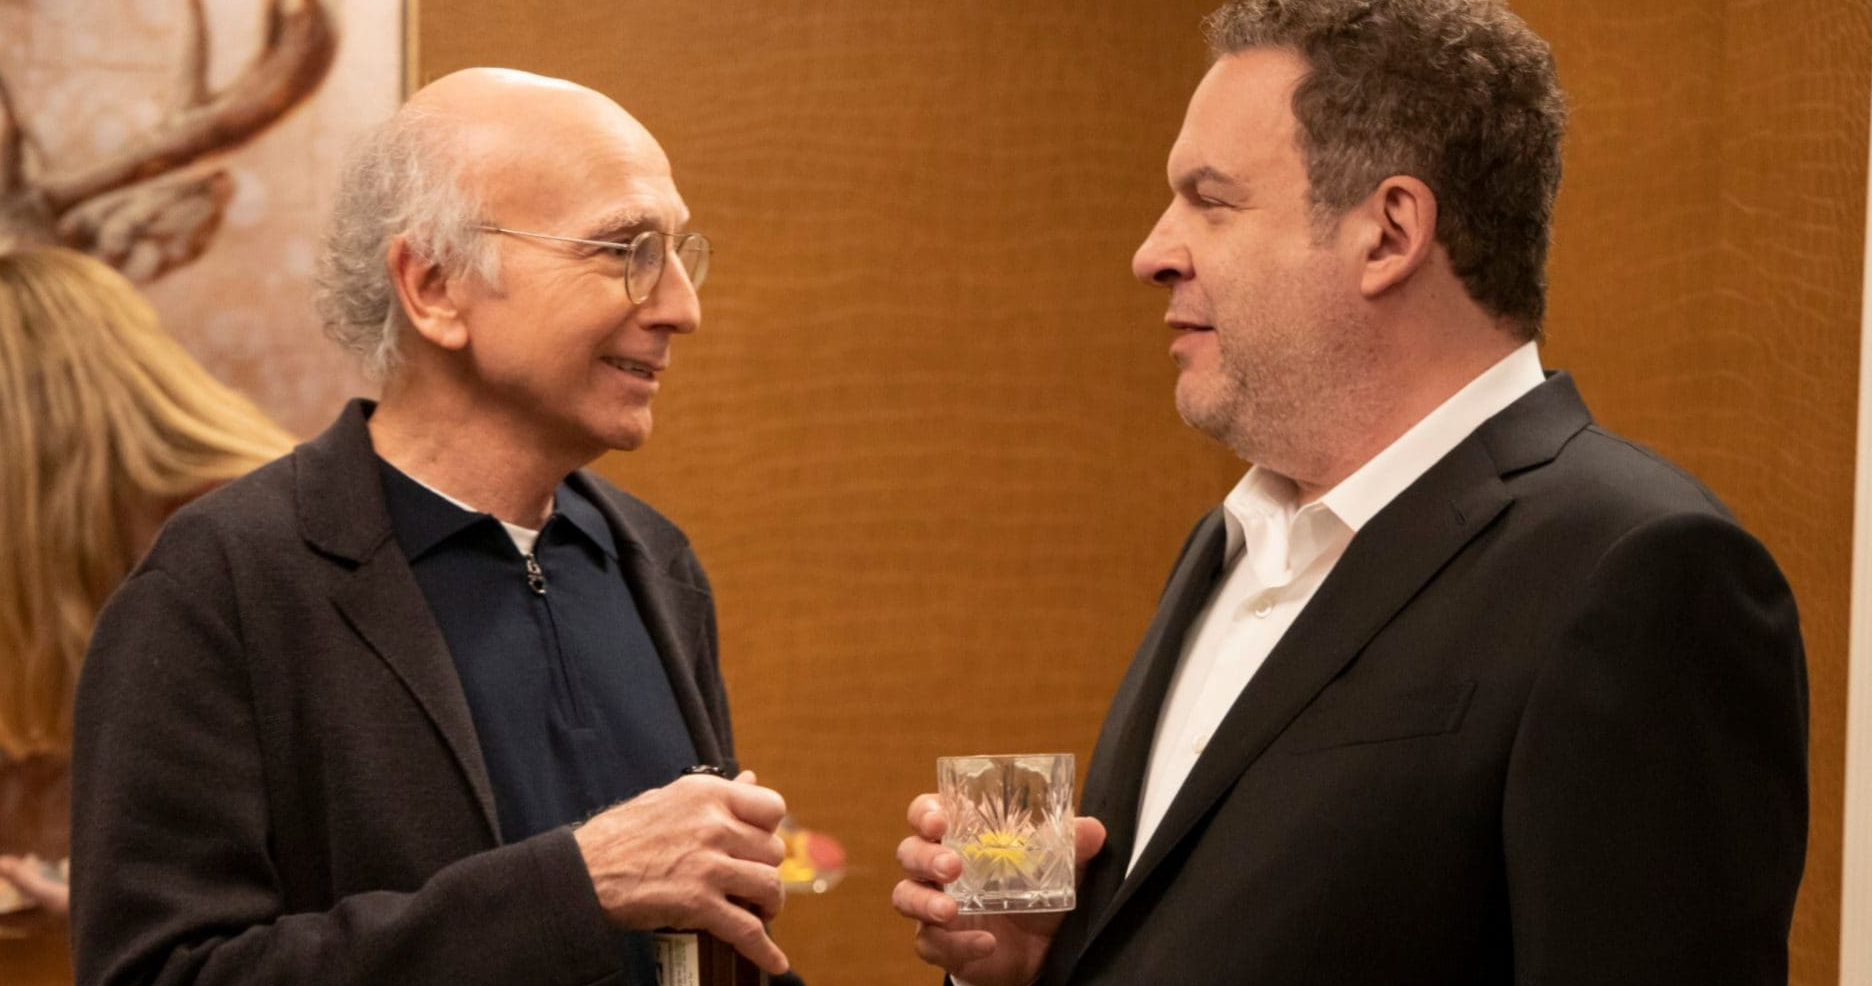 Curb Your Enthusiasm May Go to Season 12, But That's Probably It Warns Jeff Garlin